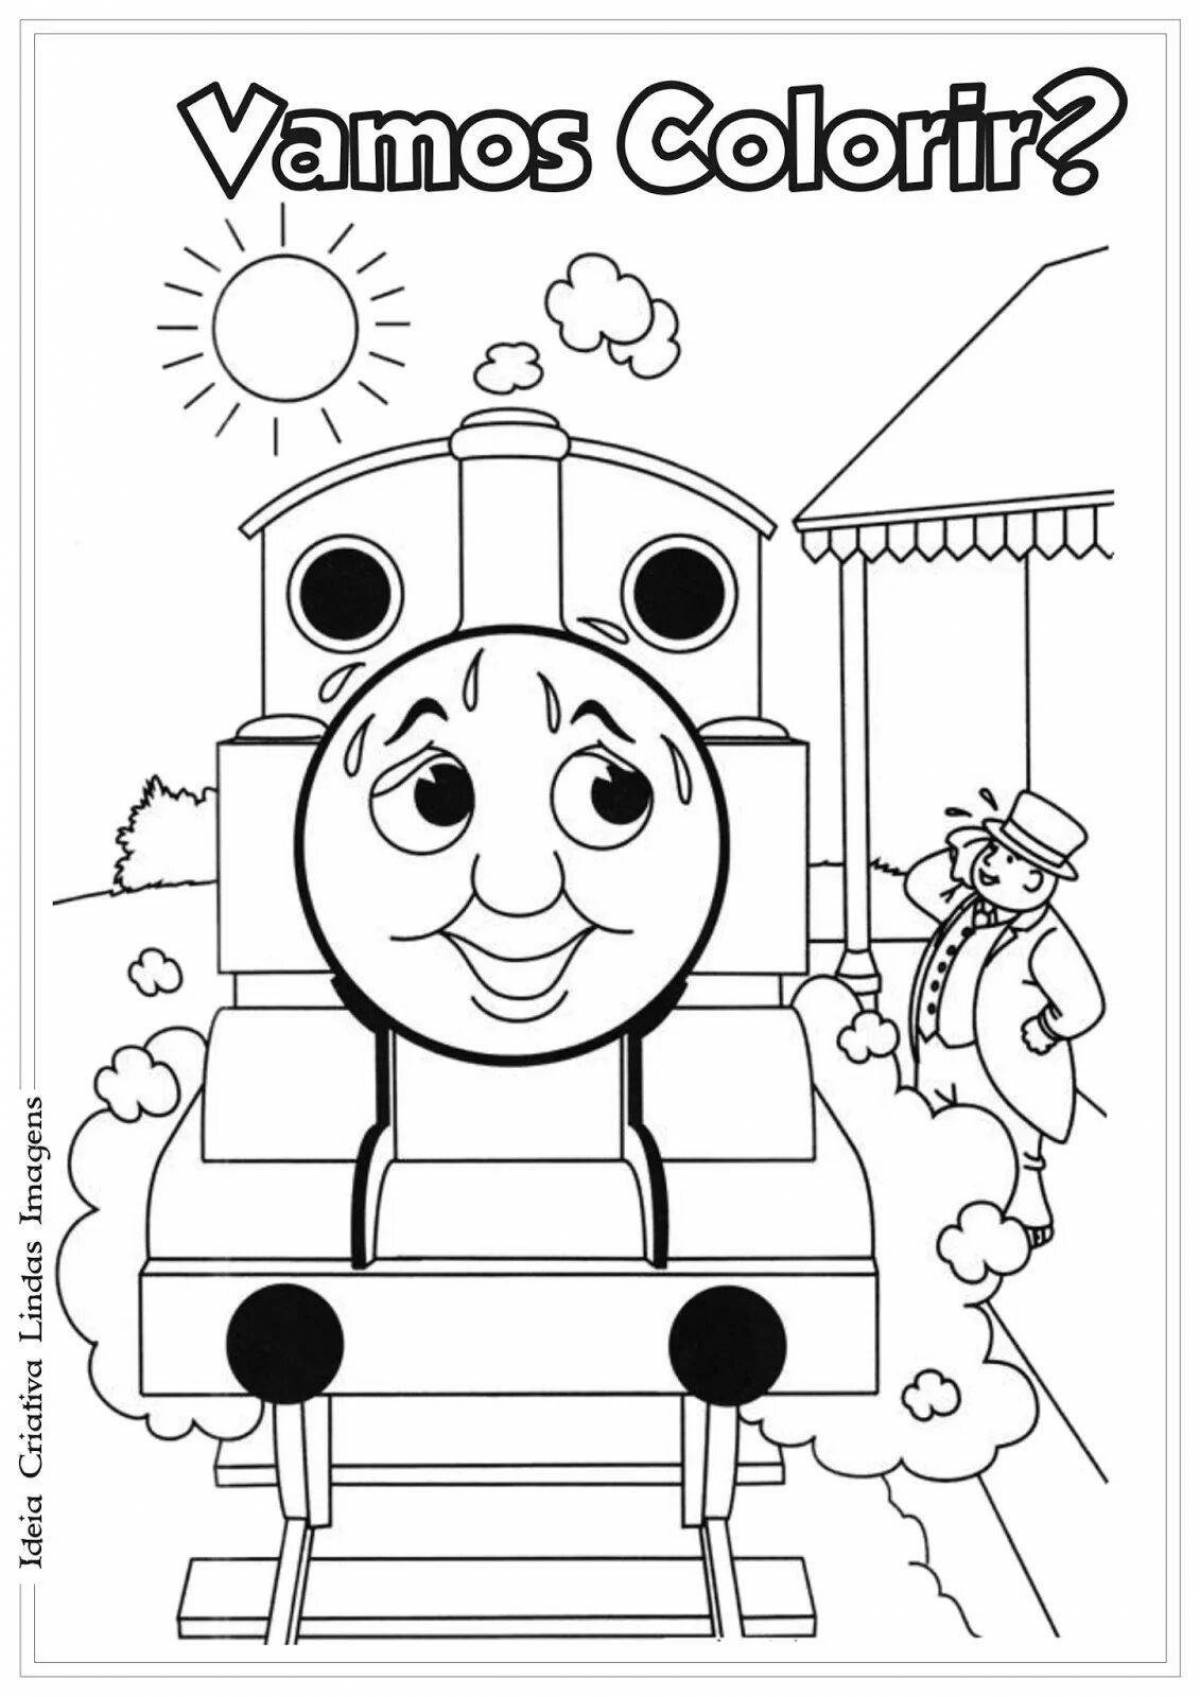 Magic coloring thomas the tank engine scary spider